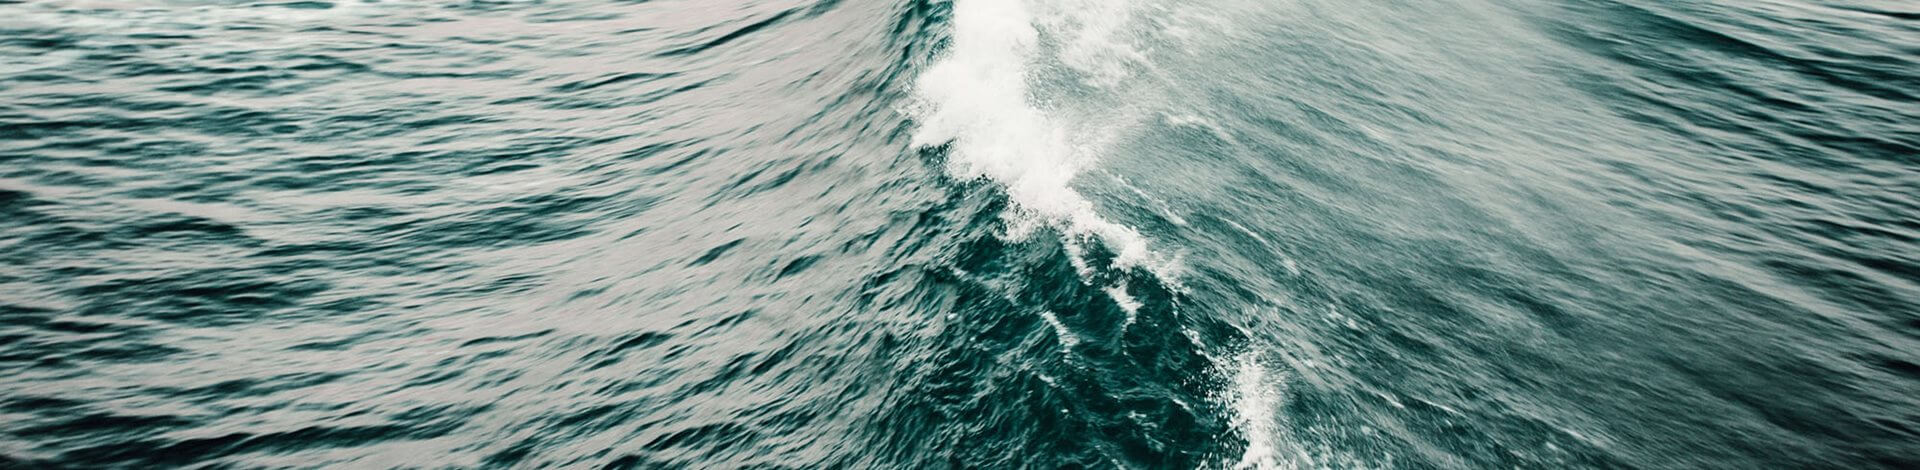 Close-up of a wave in the ocean